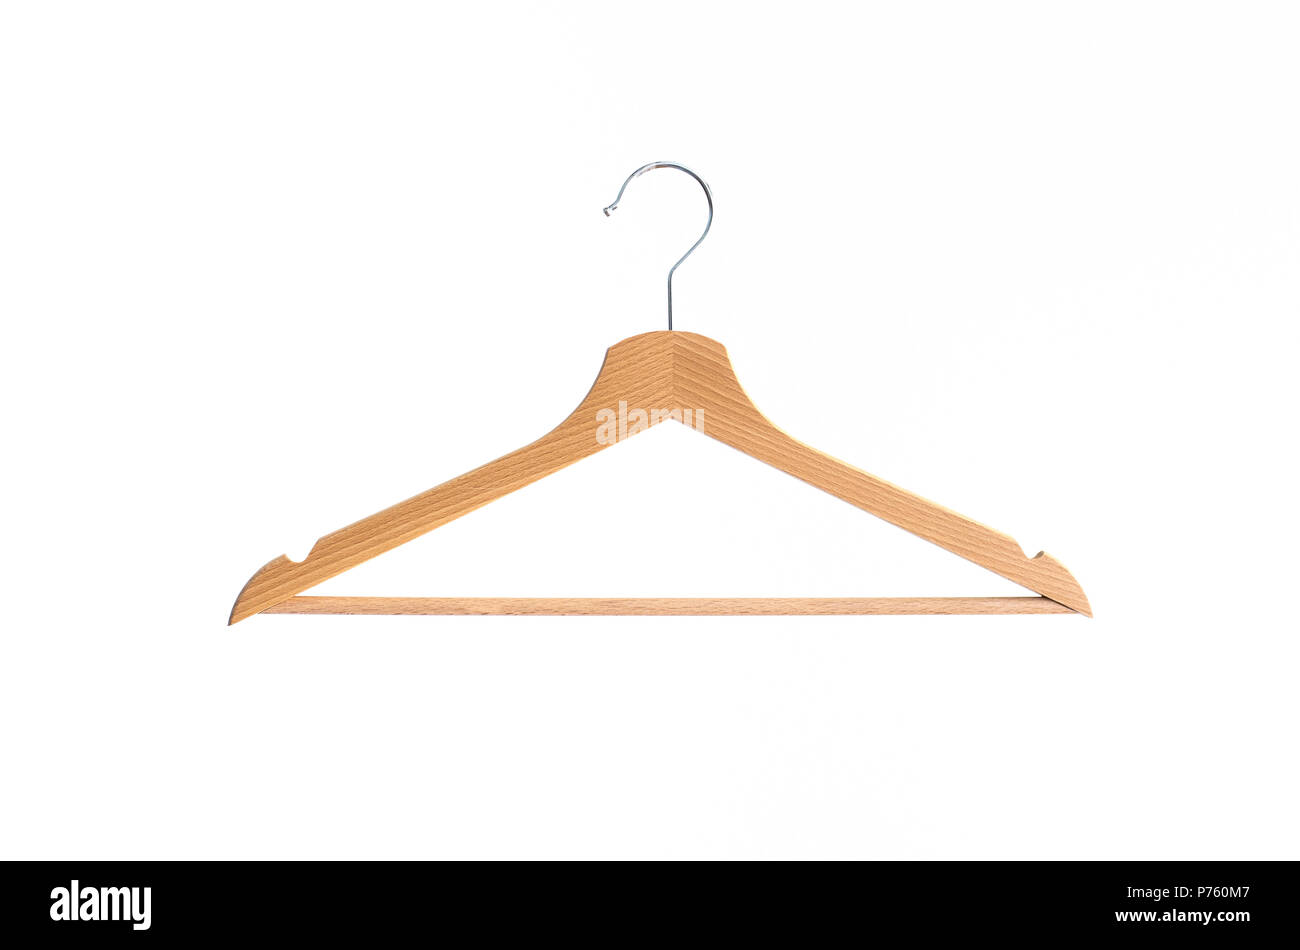 Wooden coat hanger isolated against bright white background Stock Photo